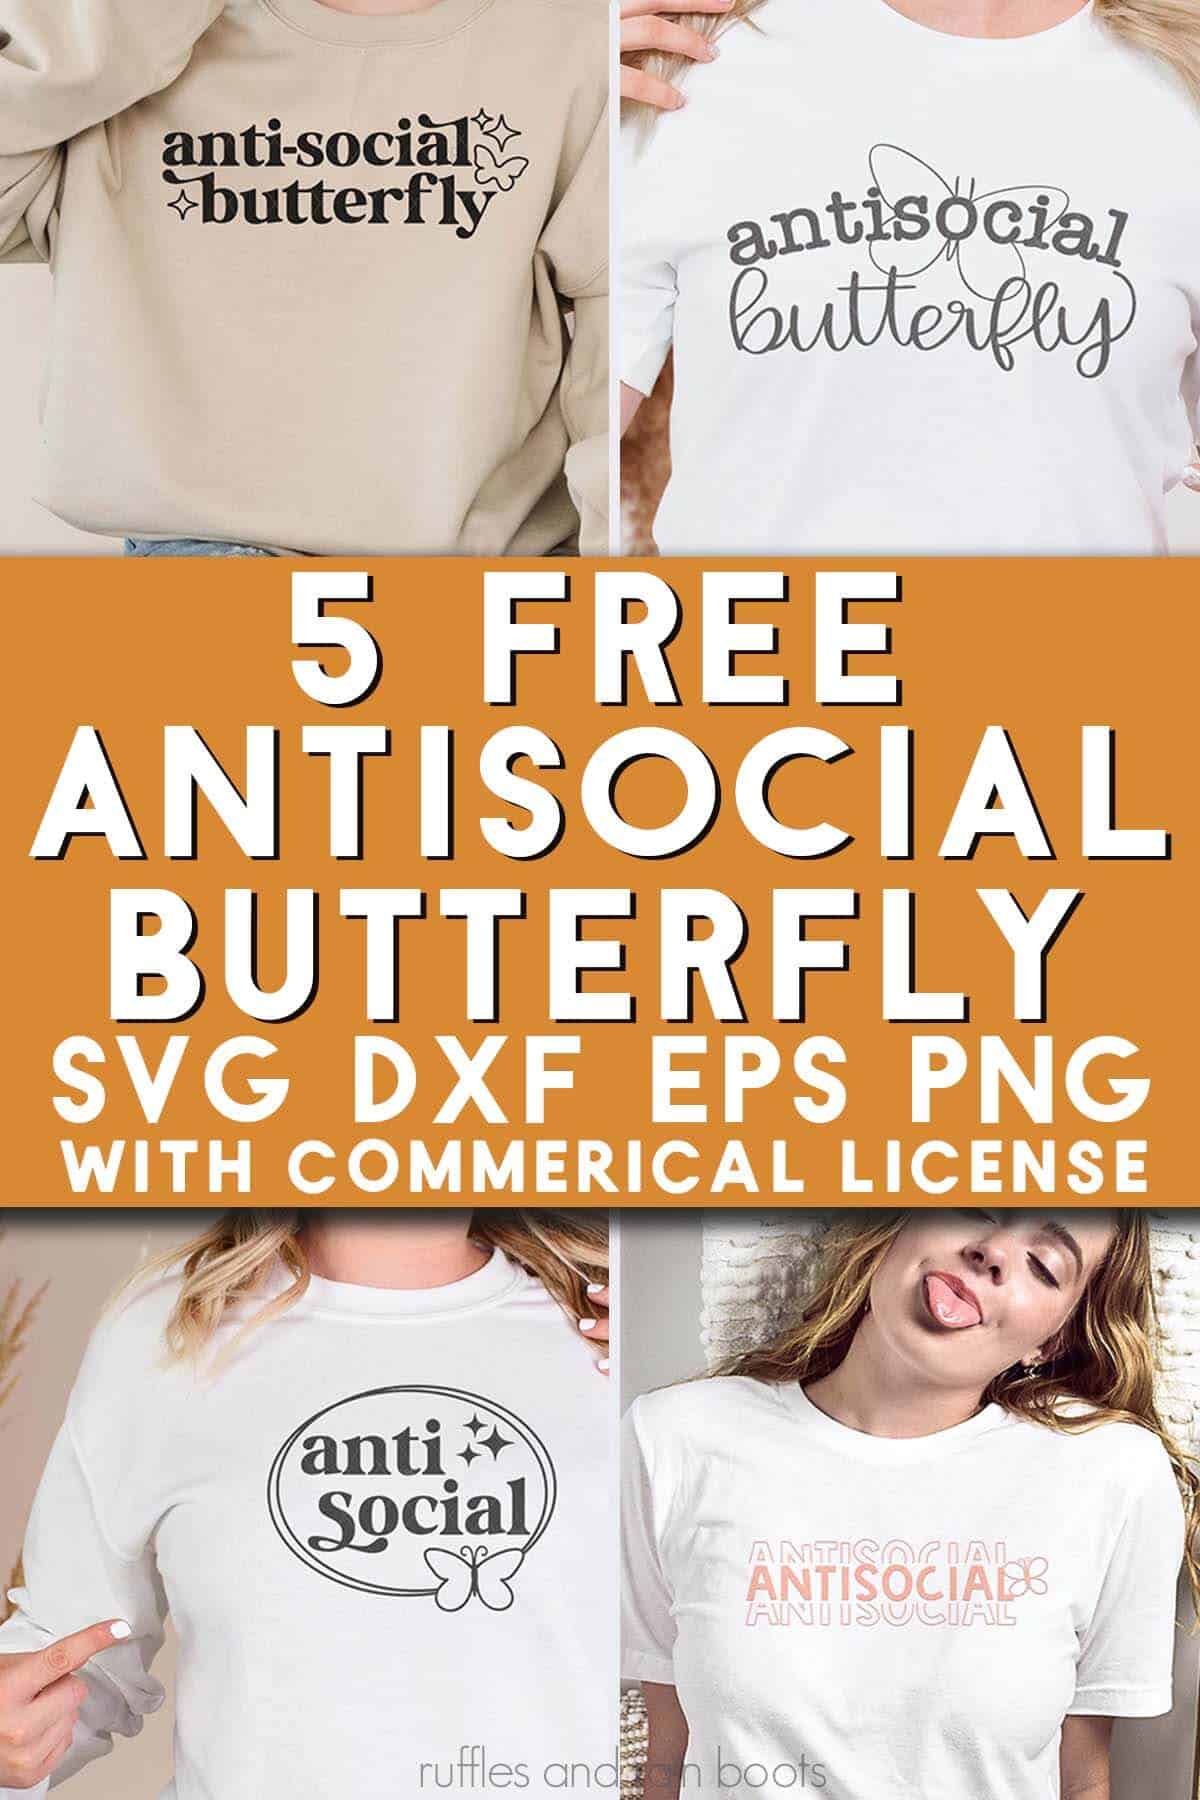 Four image vertical collage of women in shirts with text which reads 5 free antisocial butterfly SVG with commercial license.